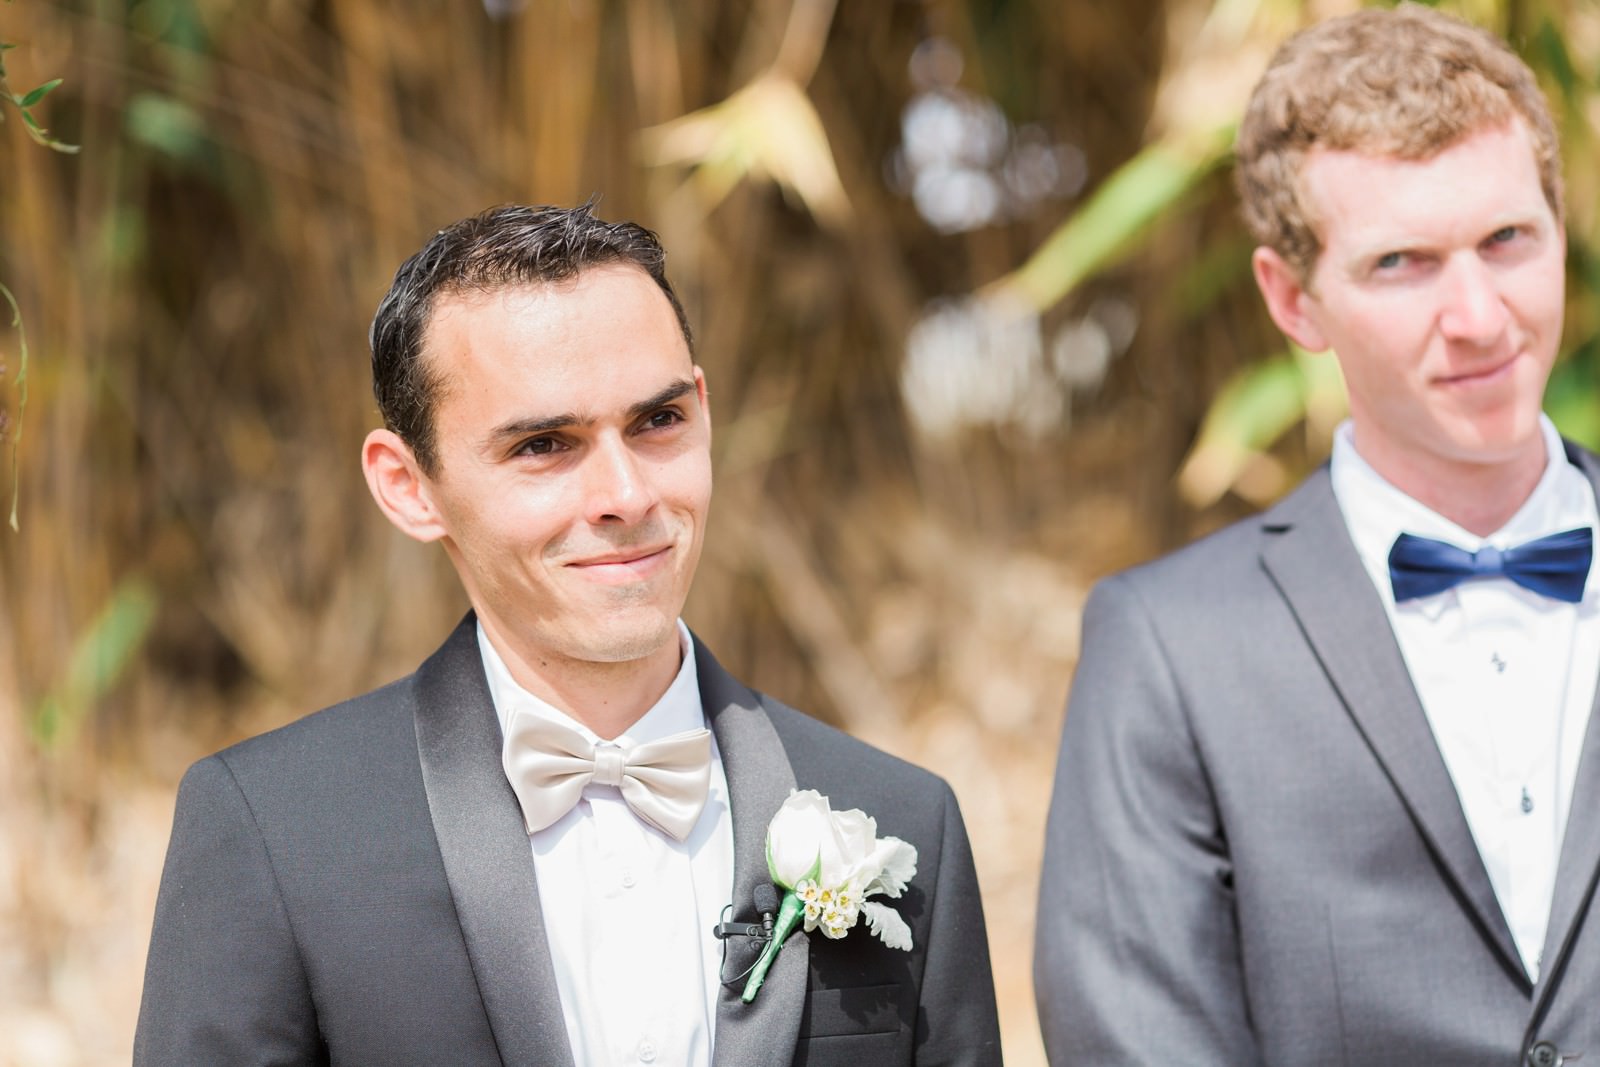 Branell Homestead wedding by Mario Colli Photography